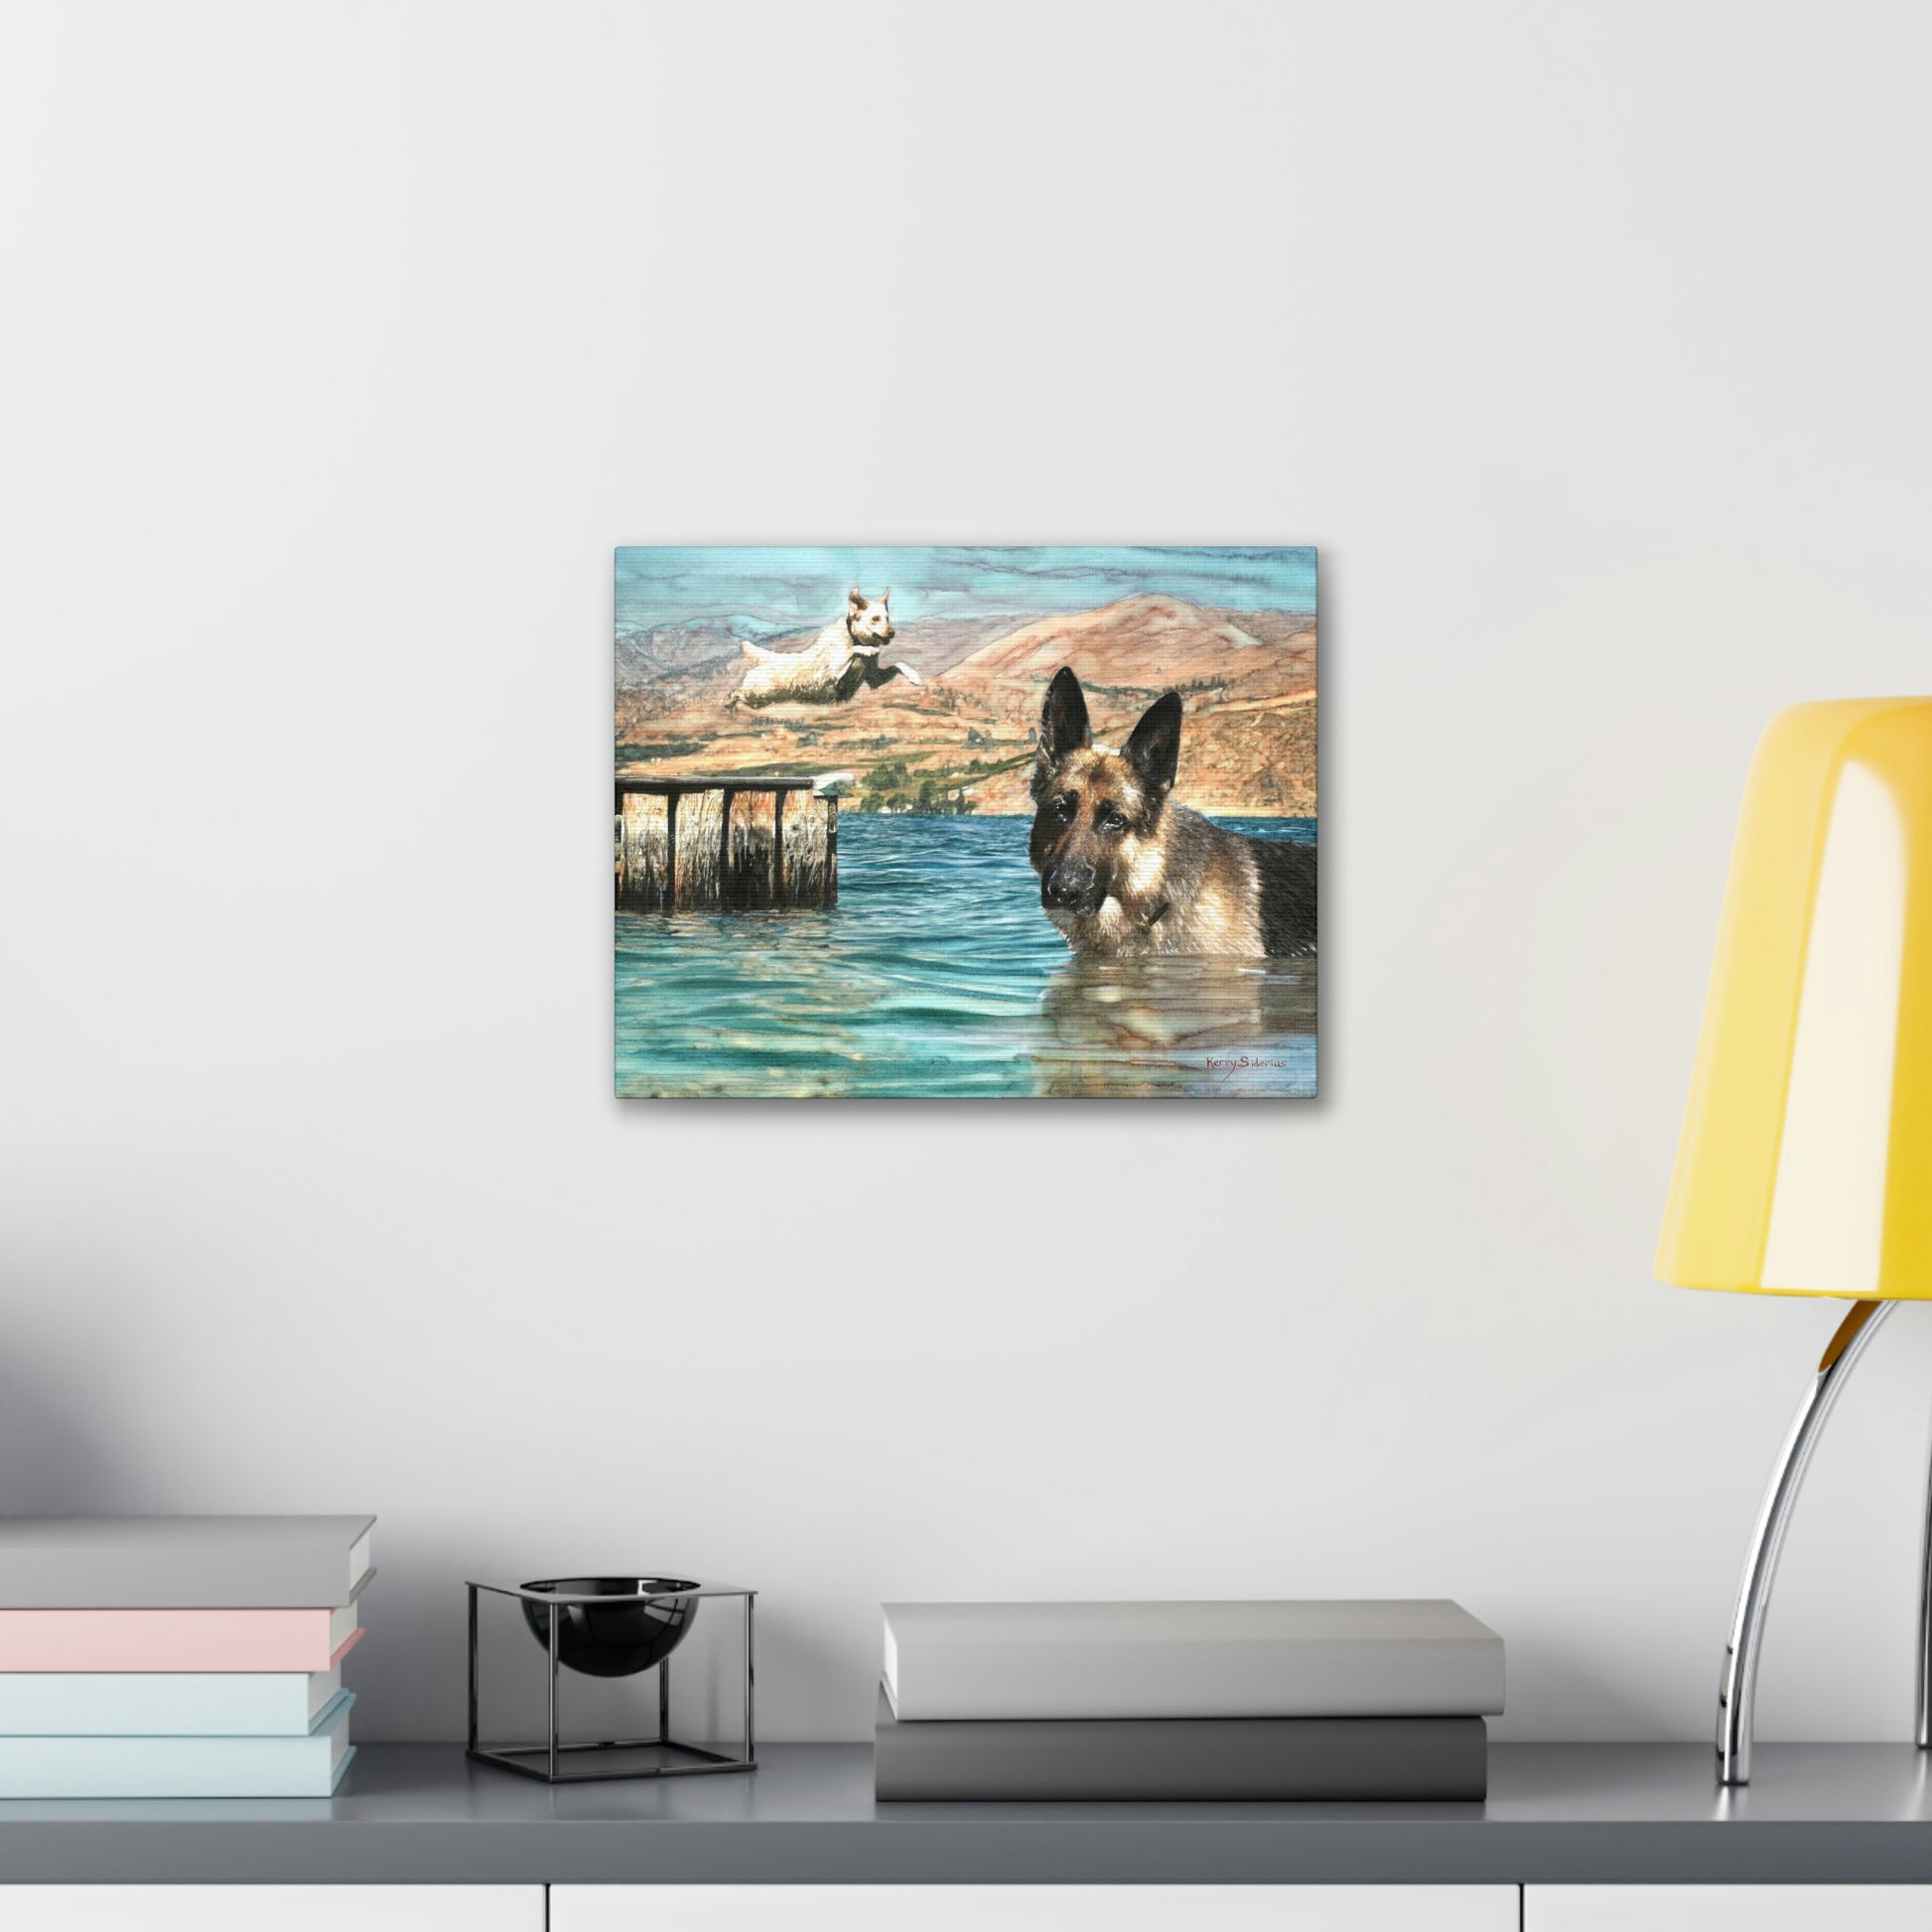 "Chelan Dogs" Canvas Gallery Wrap - Kerry Siderius Art 